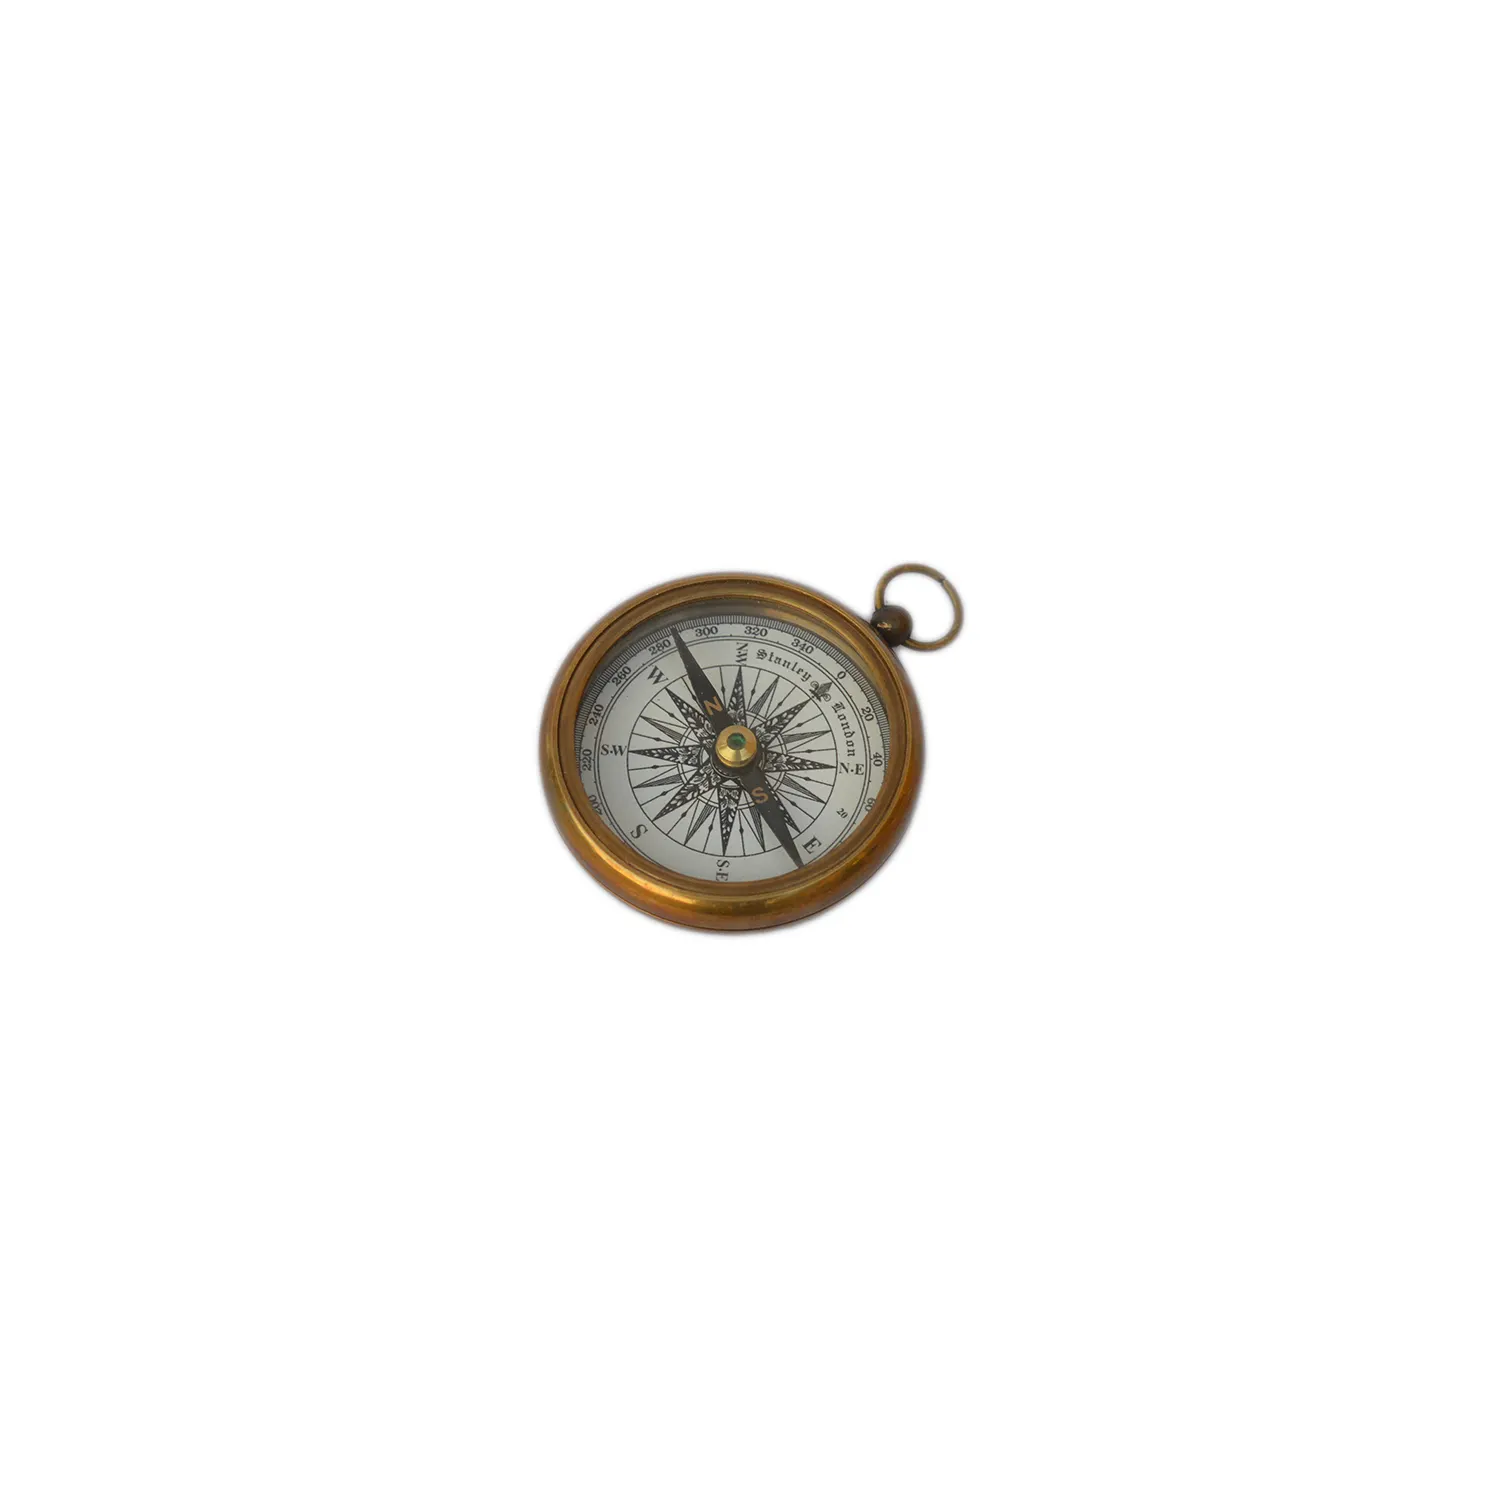 Nautical Compass Multi-functional Mini Products Retro Style Vintage Theme Pirate Coin Solid Metal Outdoor Nautical Gadgets